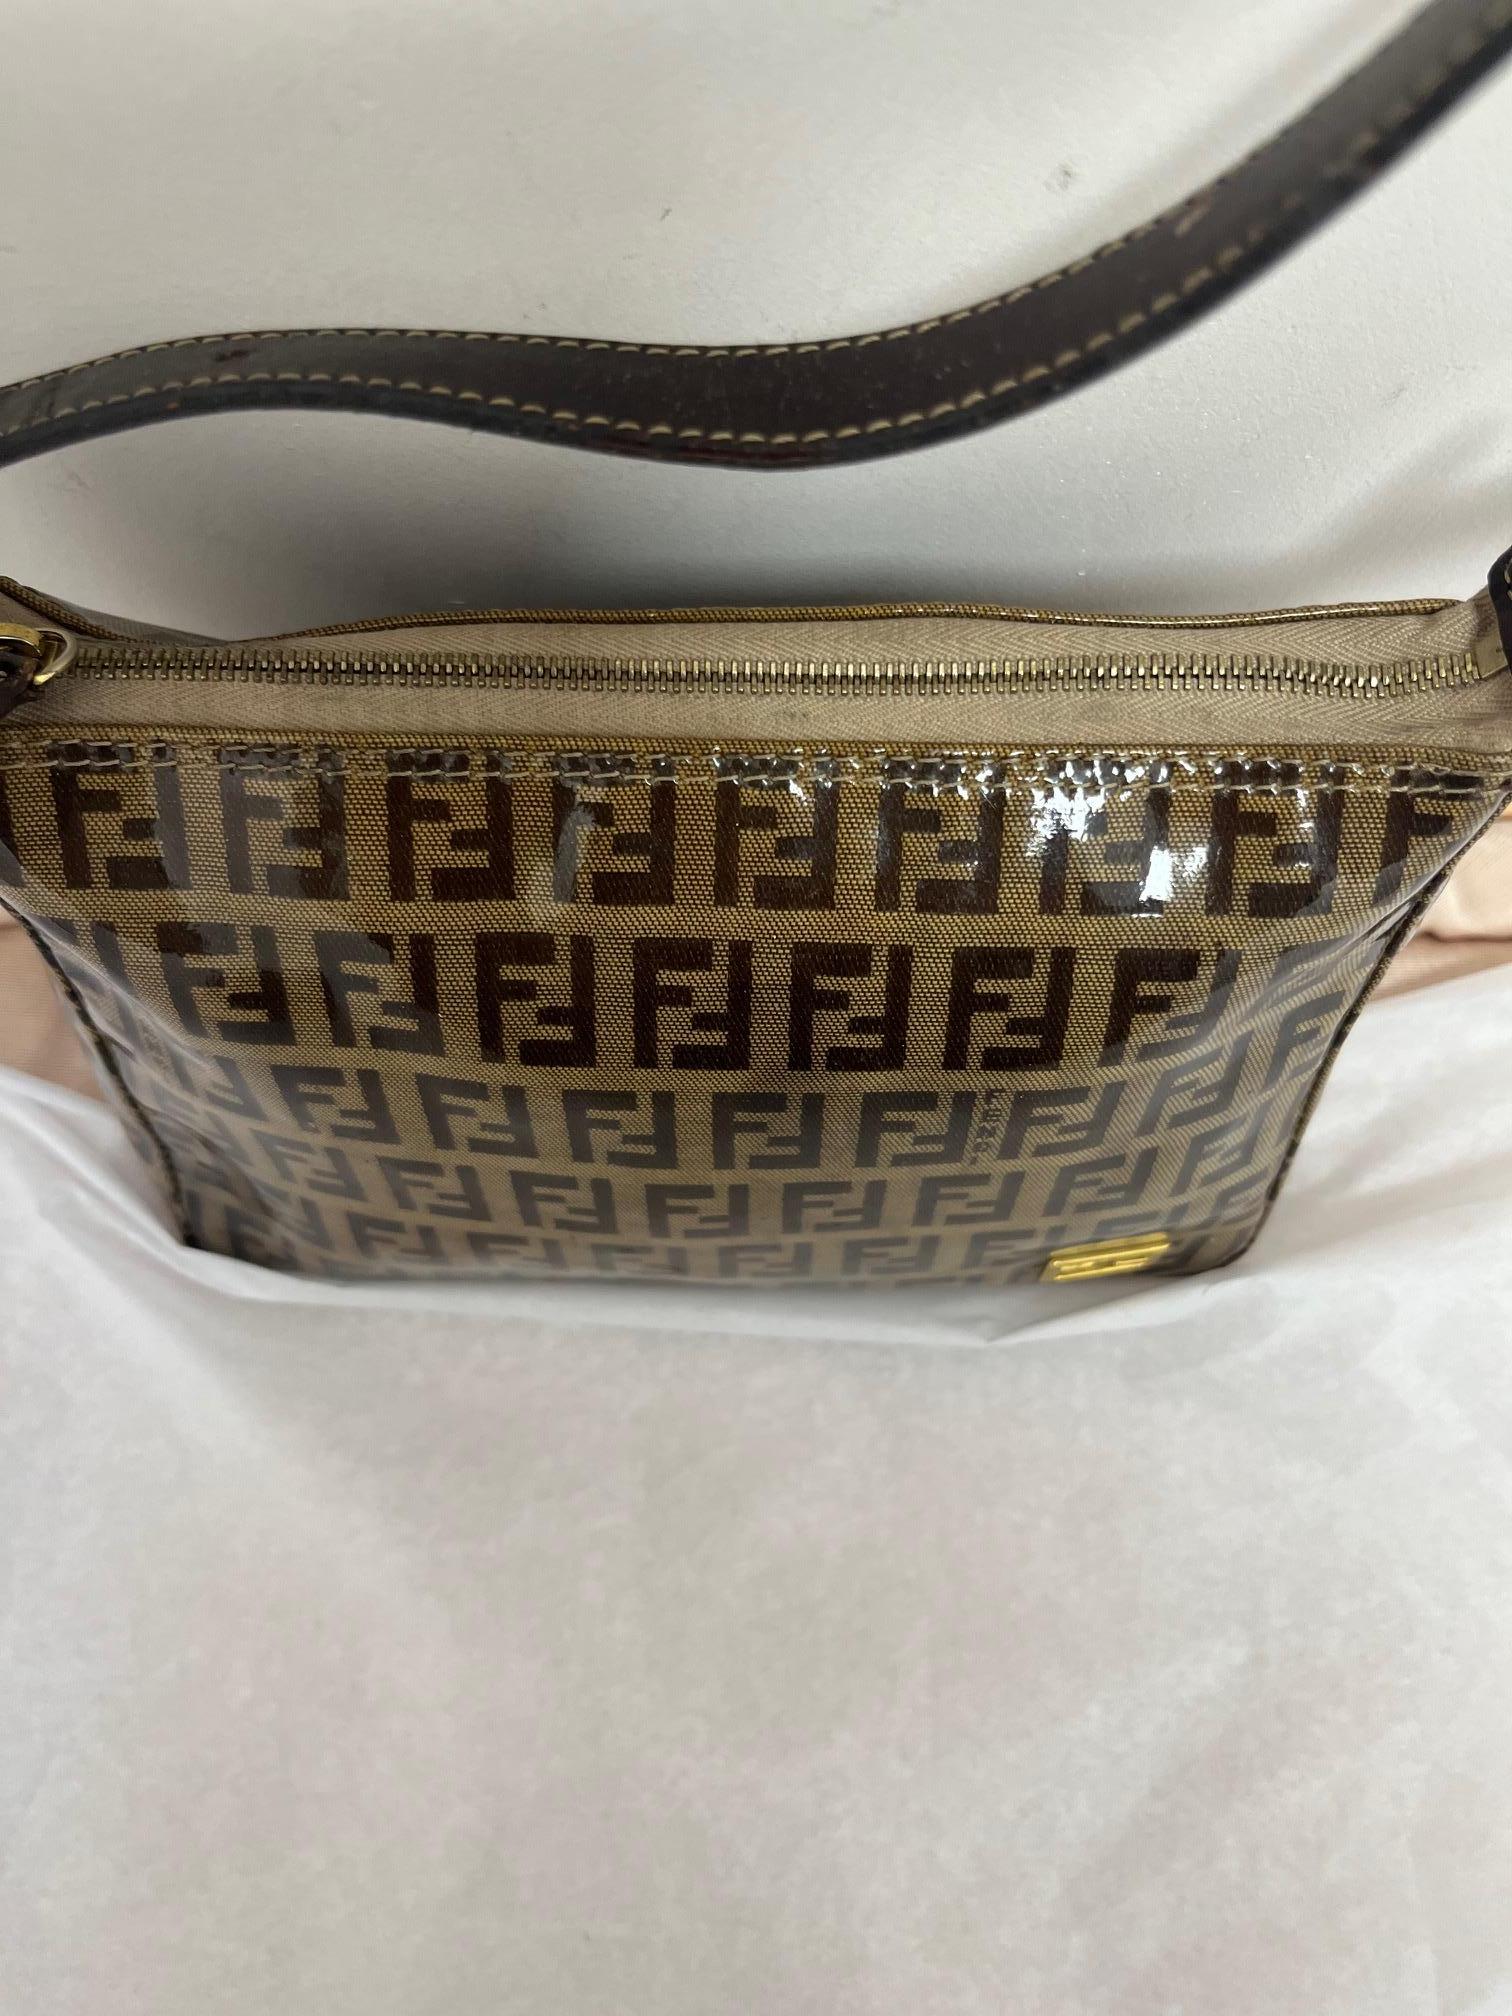 Fendi Vintage Zucchino PVC/Leather Pochette In Good Condition For Sale In Port Hope, ON